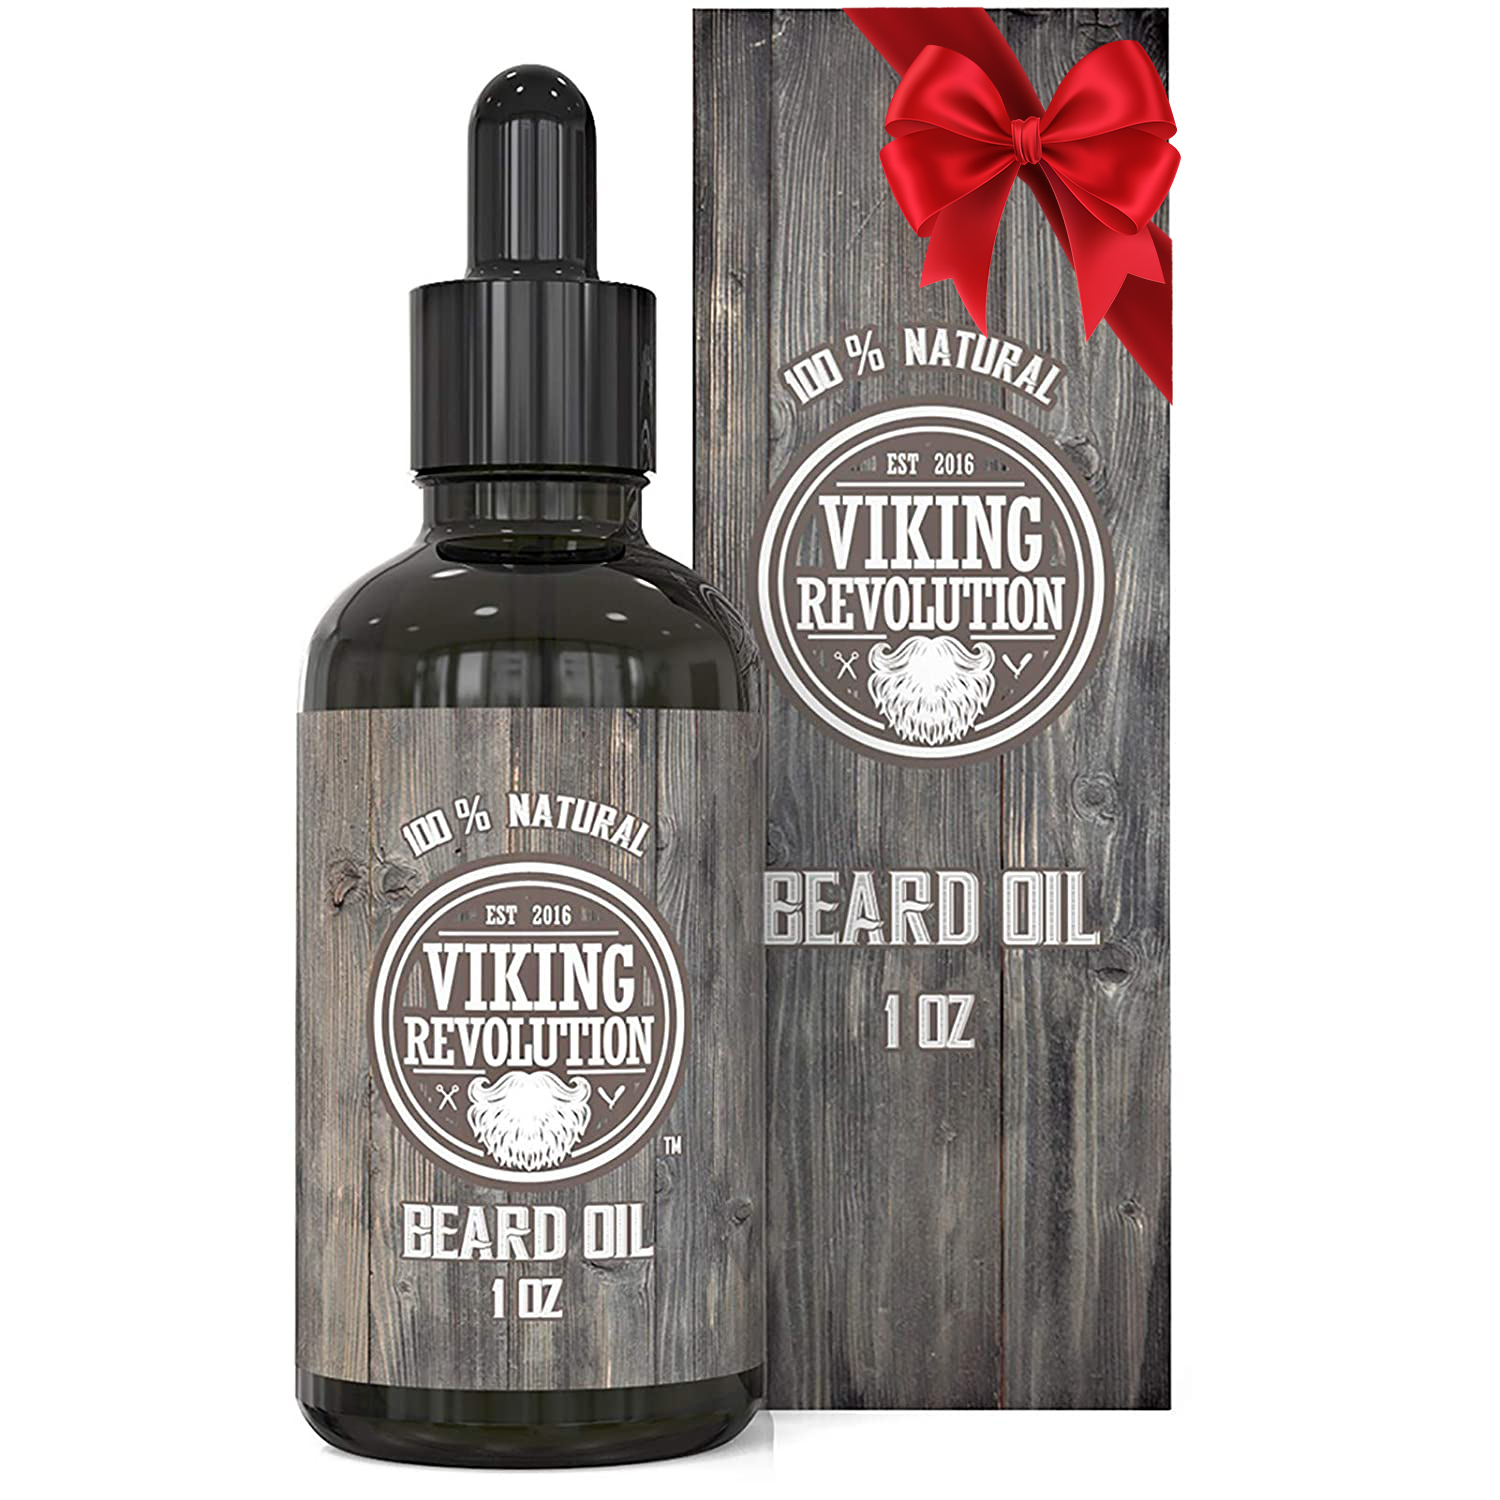 Viking Revolution - Beard Oil - All Natural, Beard and Mustache Oil - Valentines Day Gifts For Men - Unscented, 1 Oz - image 1 of 15